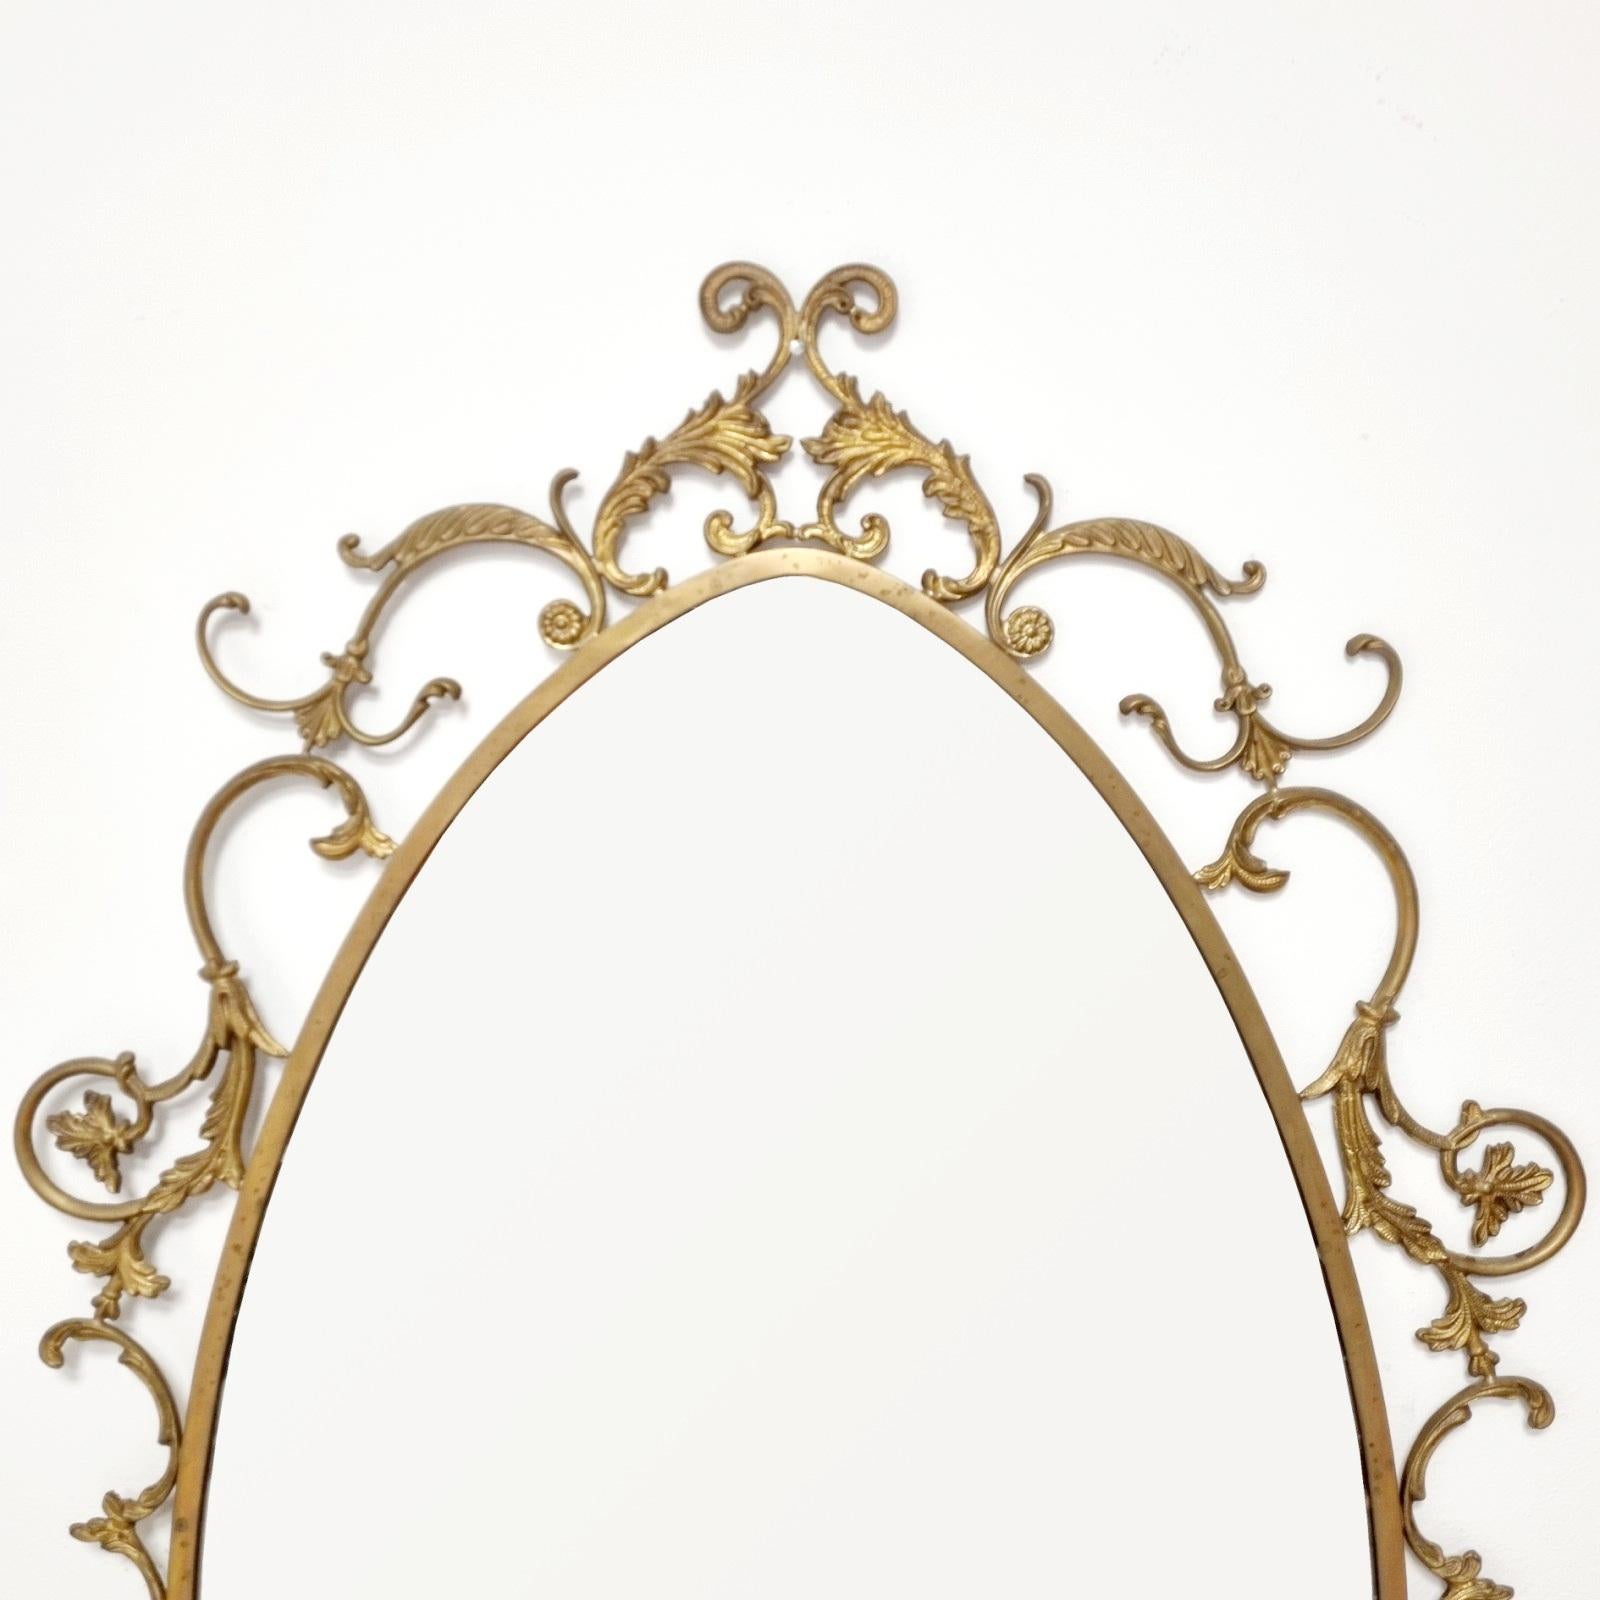 Large brass mirror made in Italy in the 60s.
With ornaments
In very good condition with signs of age.